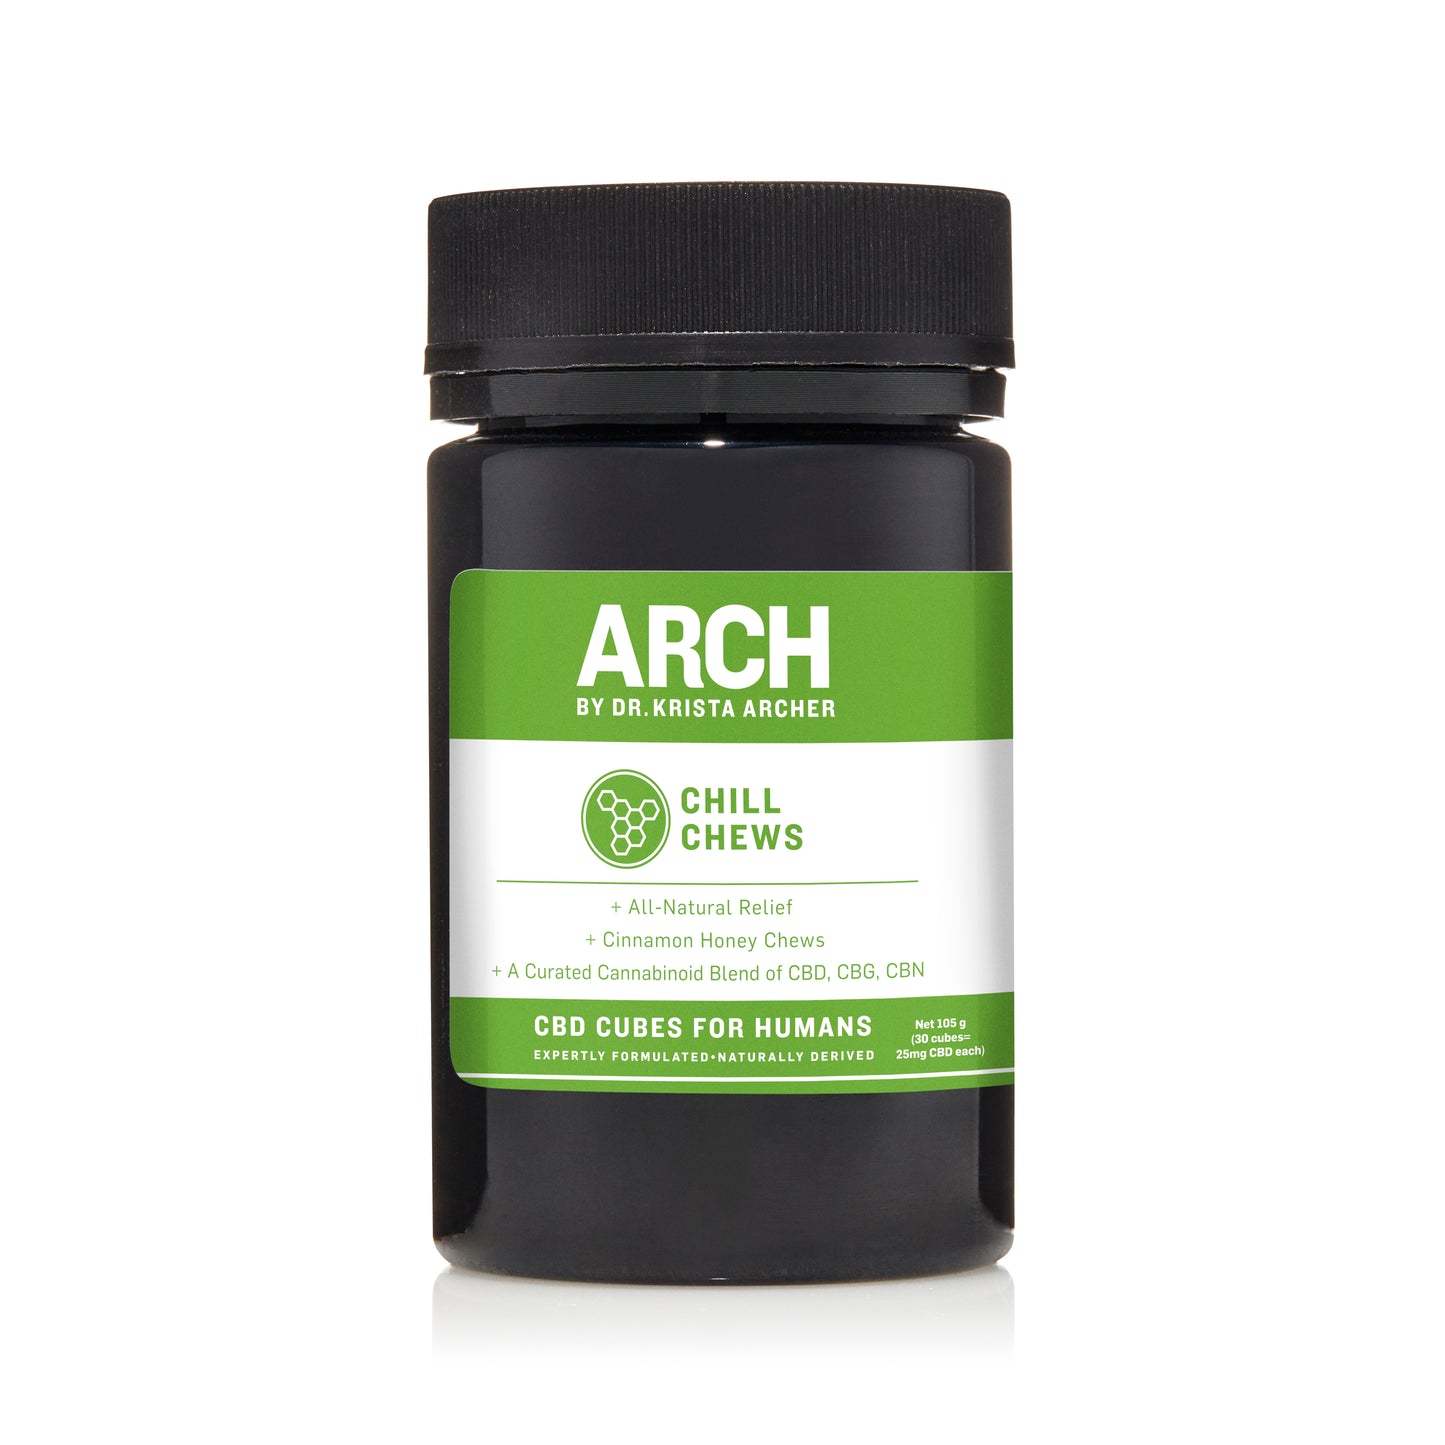 ARCH CBD Chill Chews for Humans – 105 g